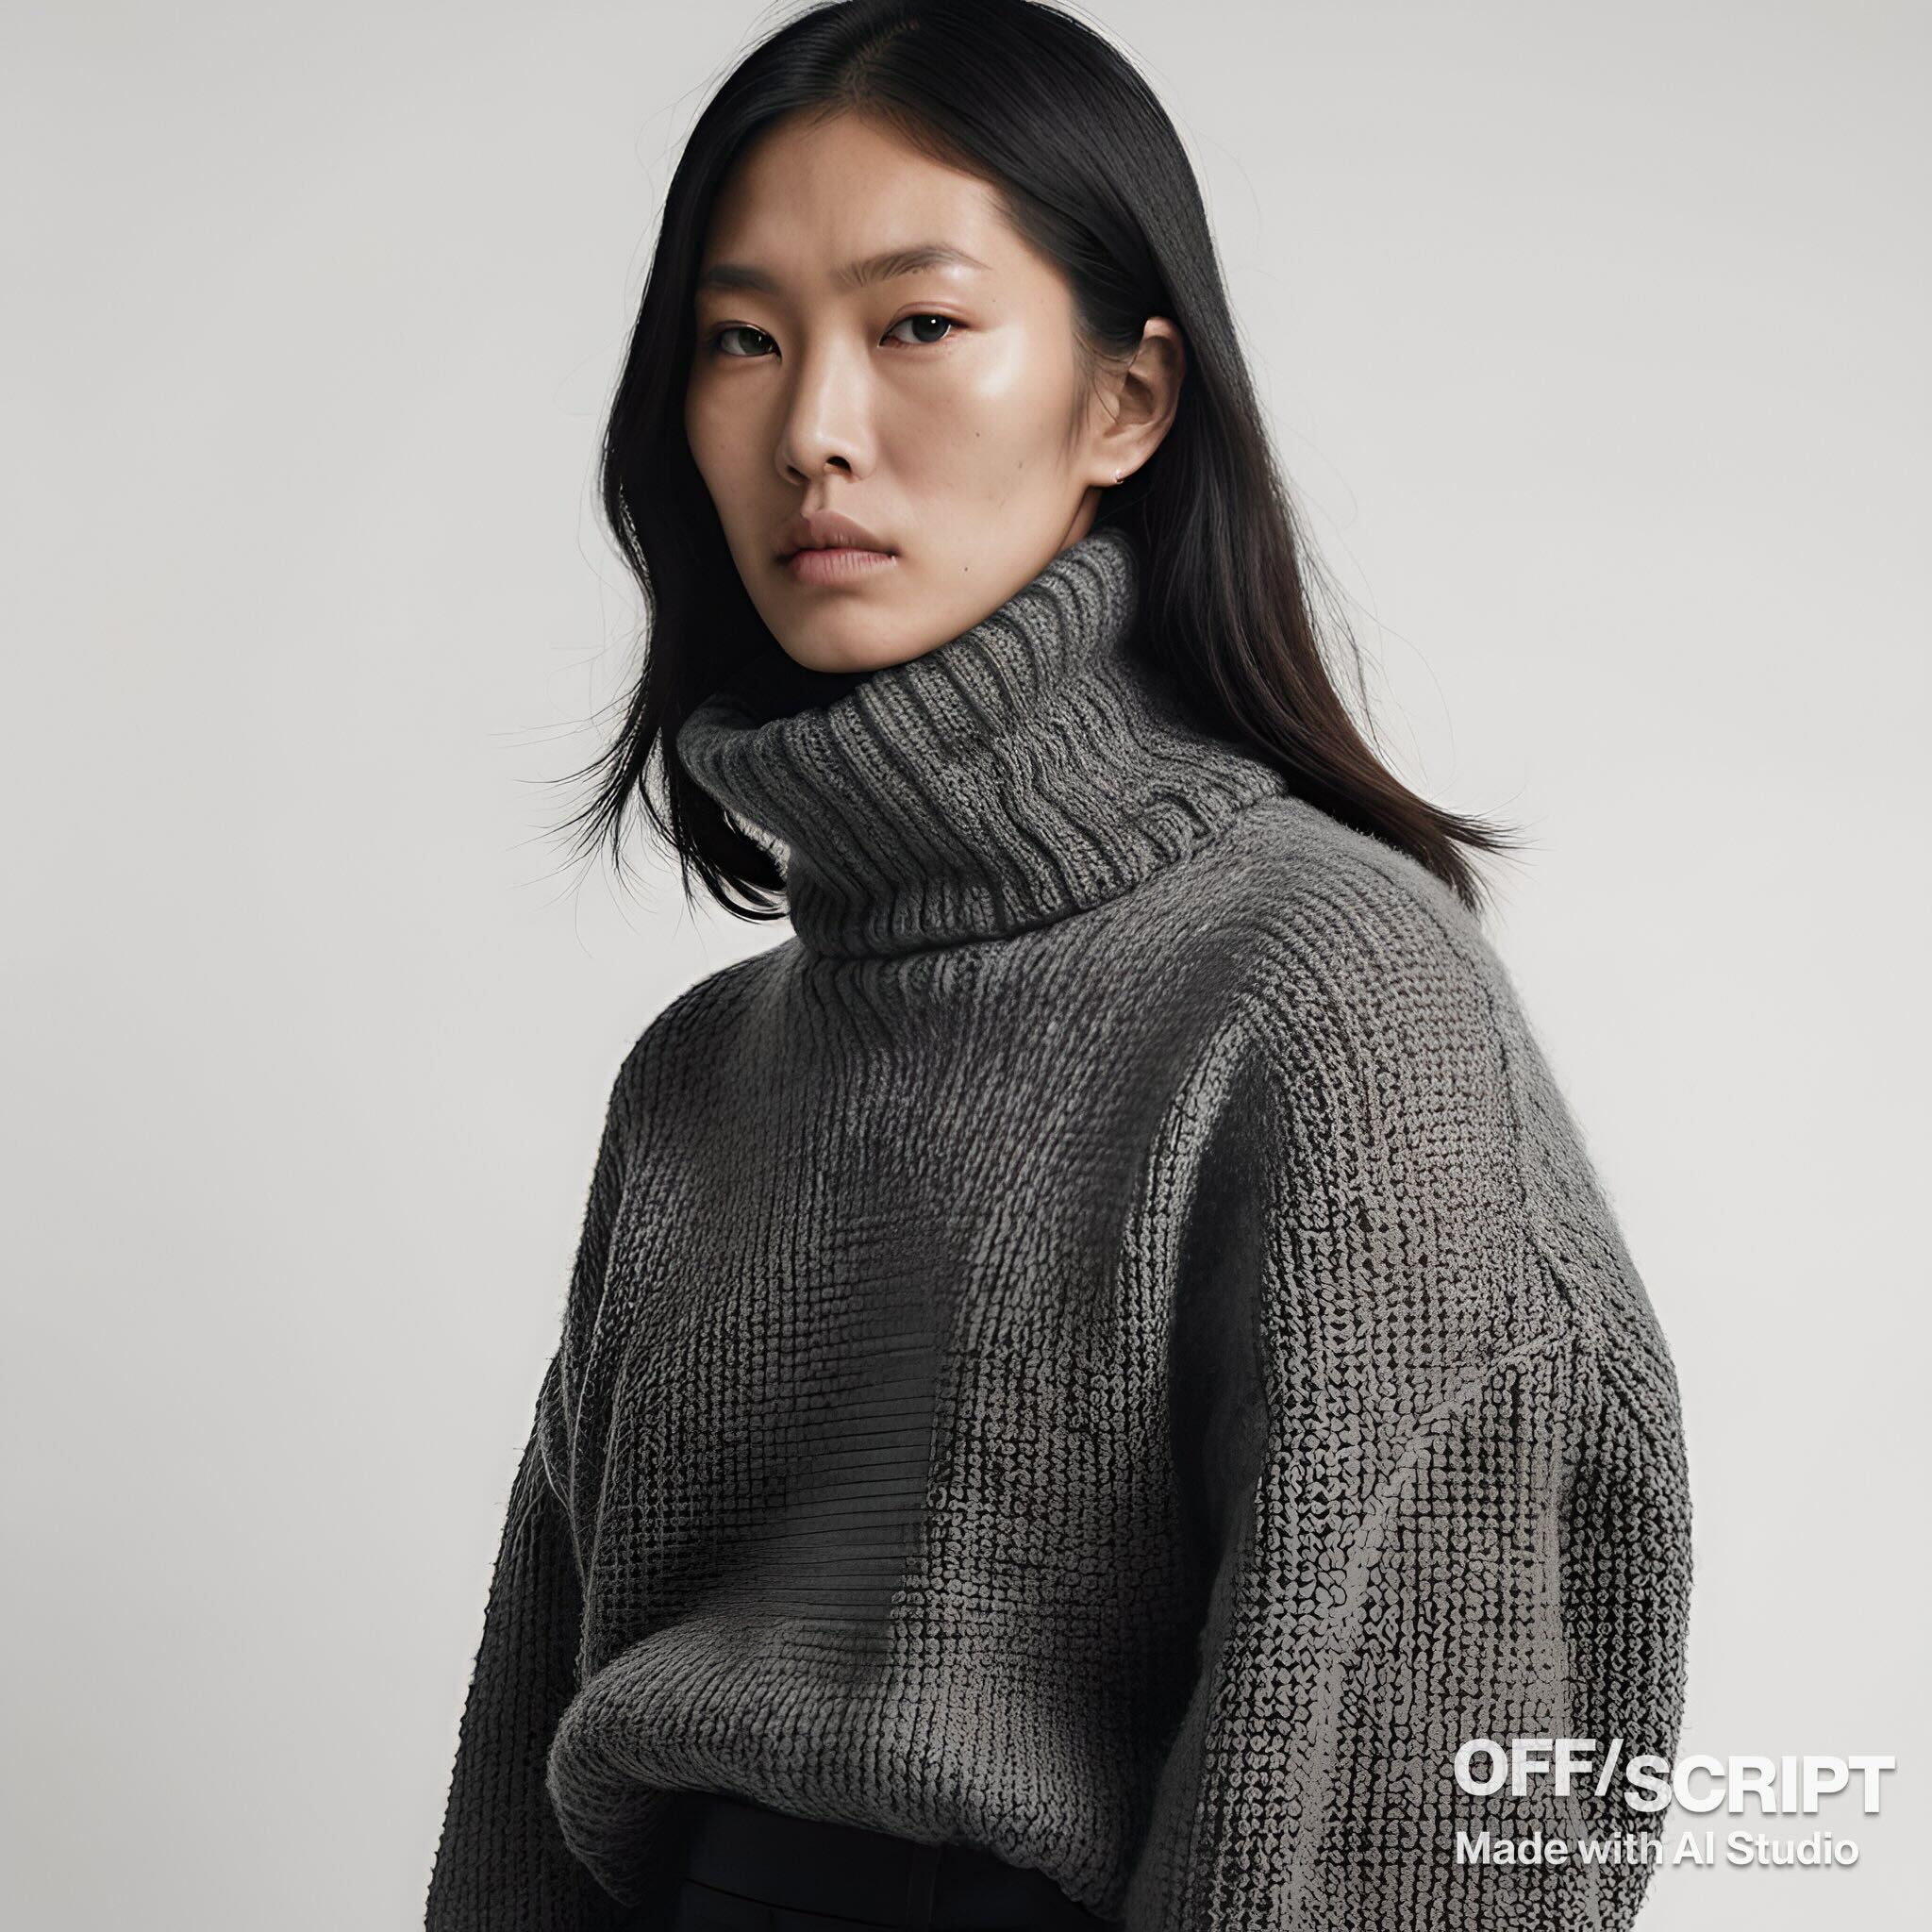 Asian woman wearing an oversized knitted turtle neck on white background. Balenciaga. Full body